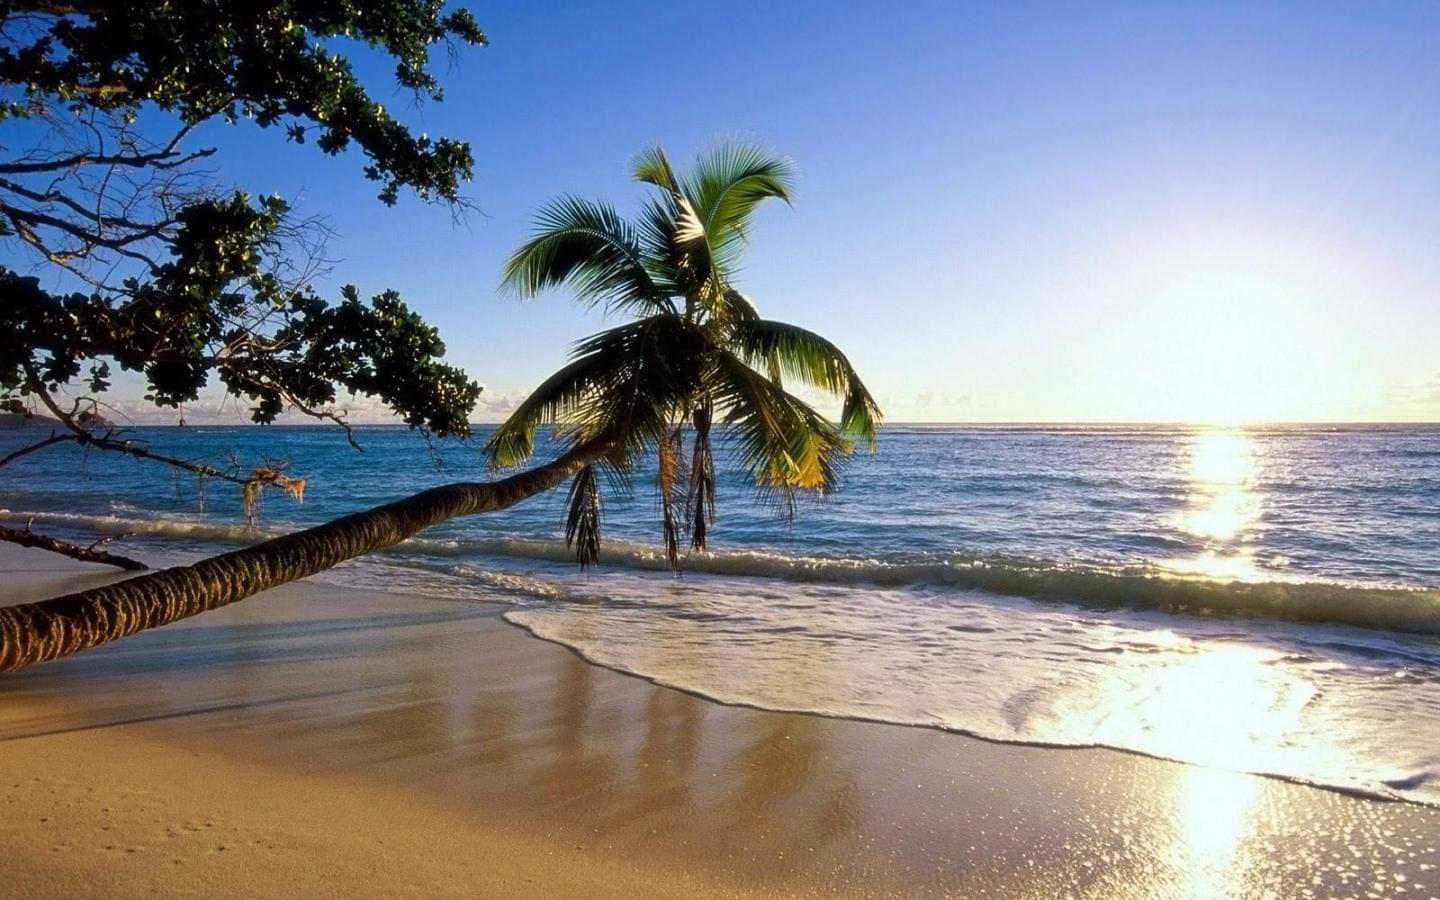 Leaning Palm Tree By The Beach Background